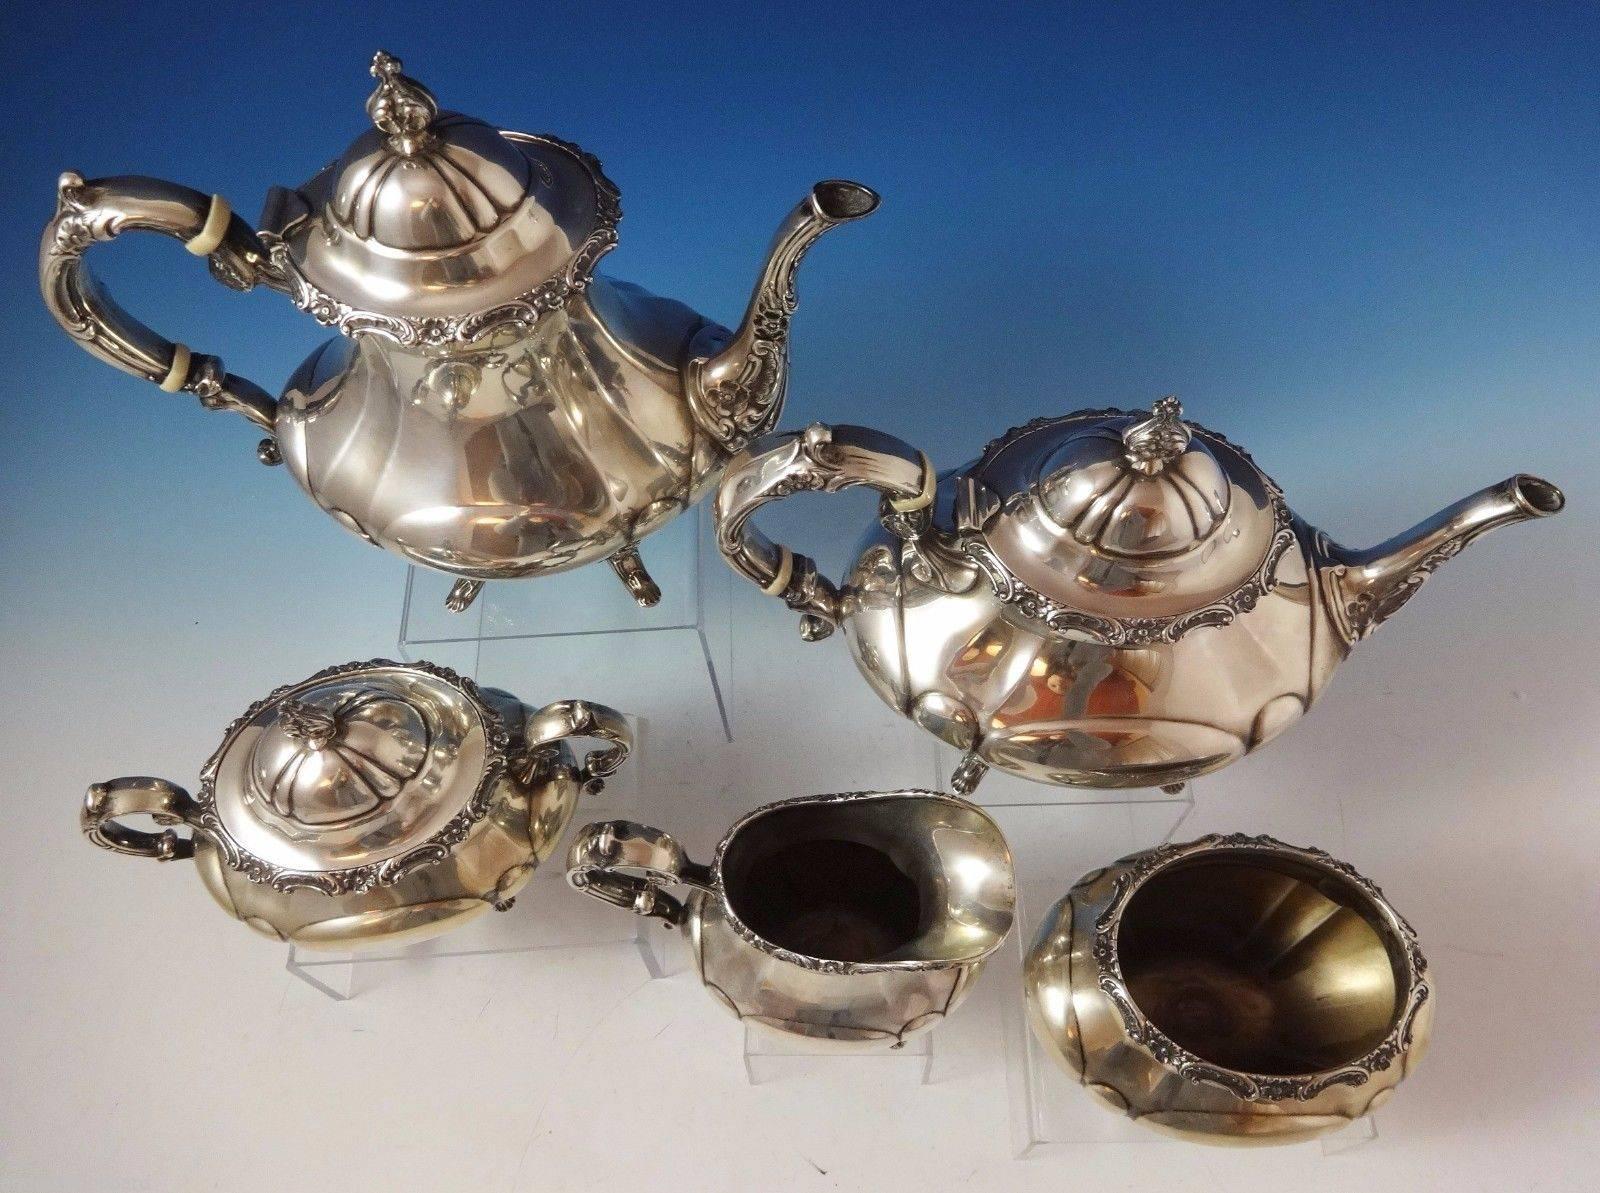 Georgian Rose by Reed & Barton.

Georgian Rose by Reed and Barton sterling silver five-piece tea set. It is marked with #670 and the set weighs 85.9 ozt. The set includes:

Coffee pot: Weighs 27 ozt., and it measures 9 1/2 x 10 1/4